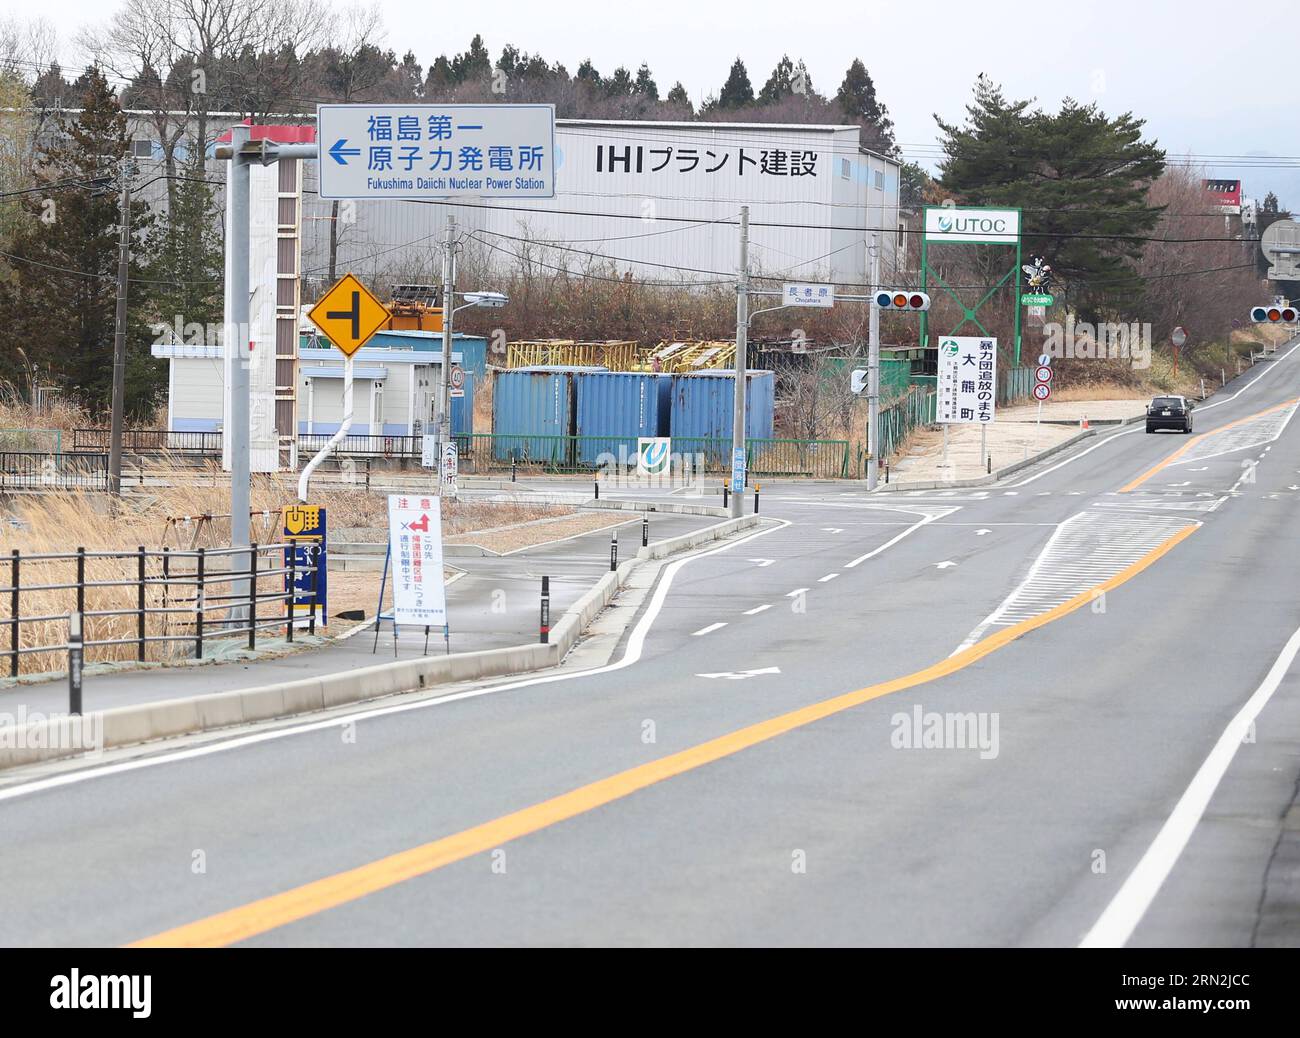 (150310) -- FUKUSHIMA, March 10, 2015 -- The sign of Fukushima Daiichi nuclear power plant is seen in the district of Okuma, Fukushima Prefecture, Japan, March 7, 2015. The scenes from the towns and villages still abandoned four years after an earthquake triggered tsunami breached the defenses of the Fukushima Daiichi nuclear power plant, would make for the perfect backdrop for a post- apocalyptic Hollywood zombie movie, but the trouble would be that the levels of radiation in the area would be too dangerous for the cast and crew. The central government s maxim of Everything is under control i Stock Photo